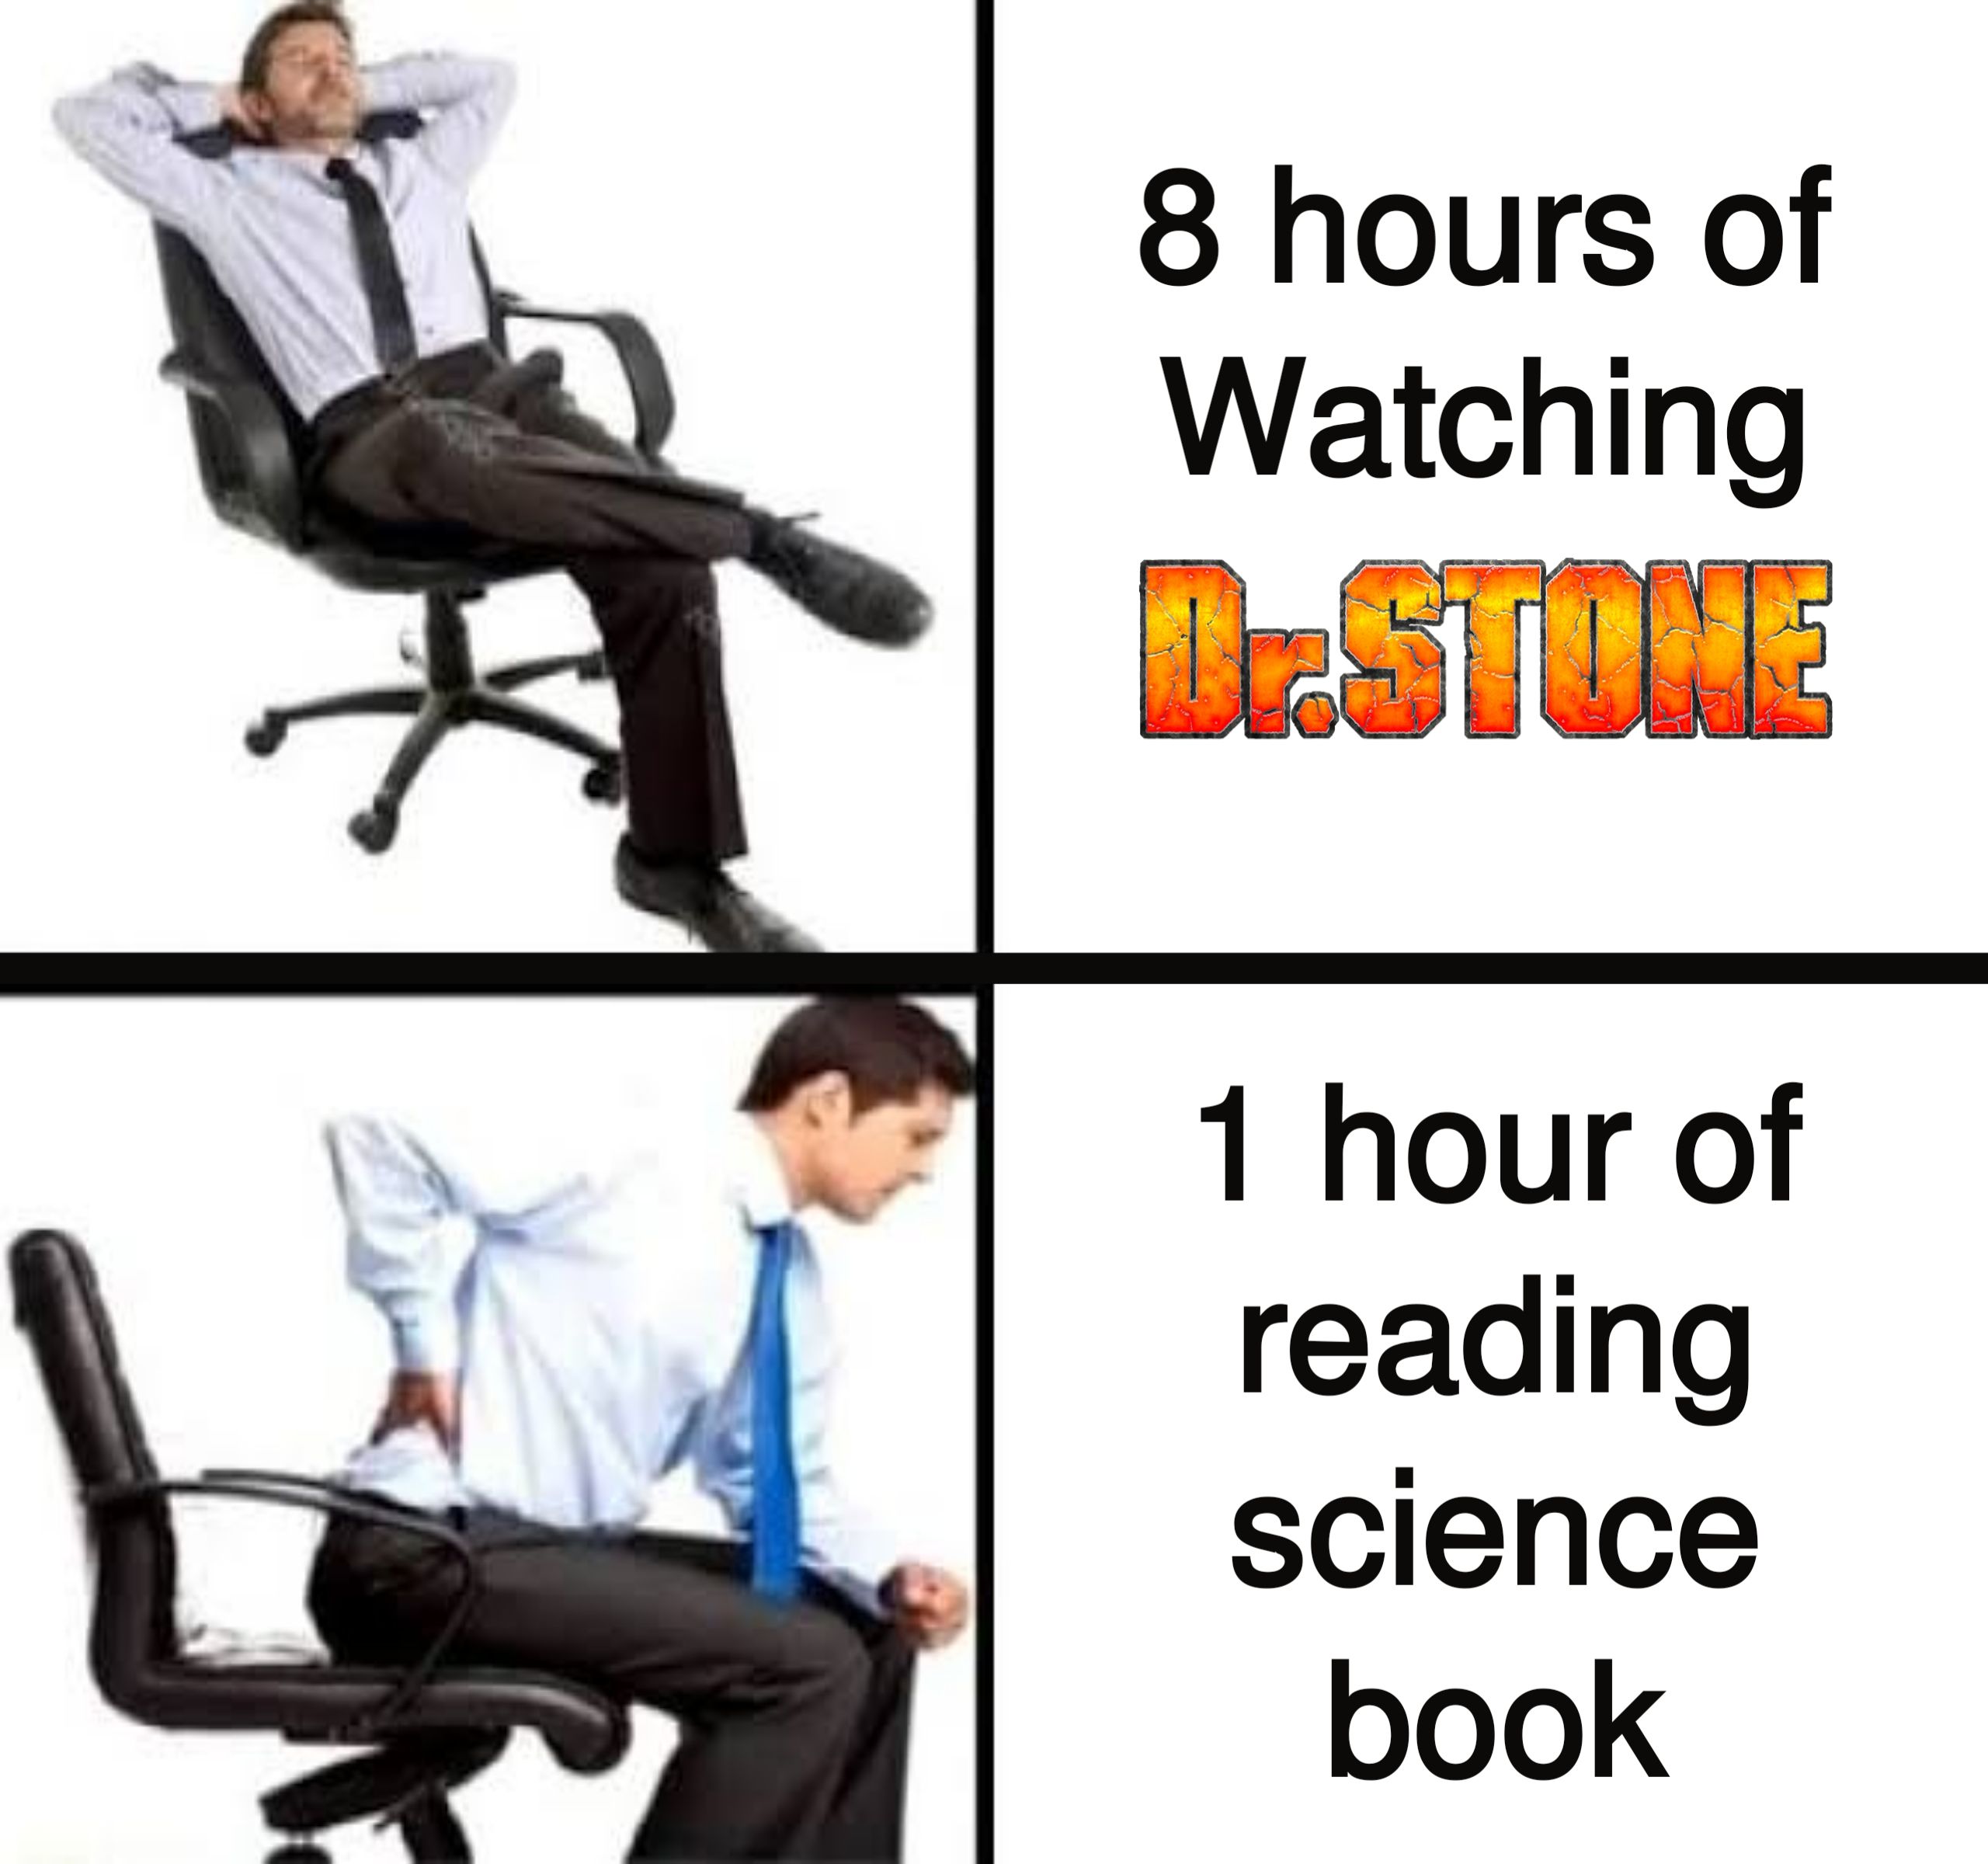 Learning science by watching Dr. Stone is more fun than learning science by reading science books.